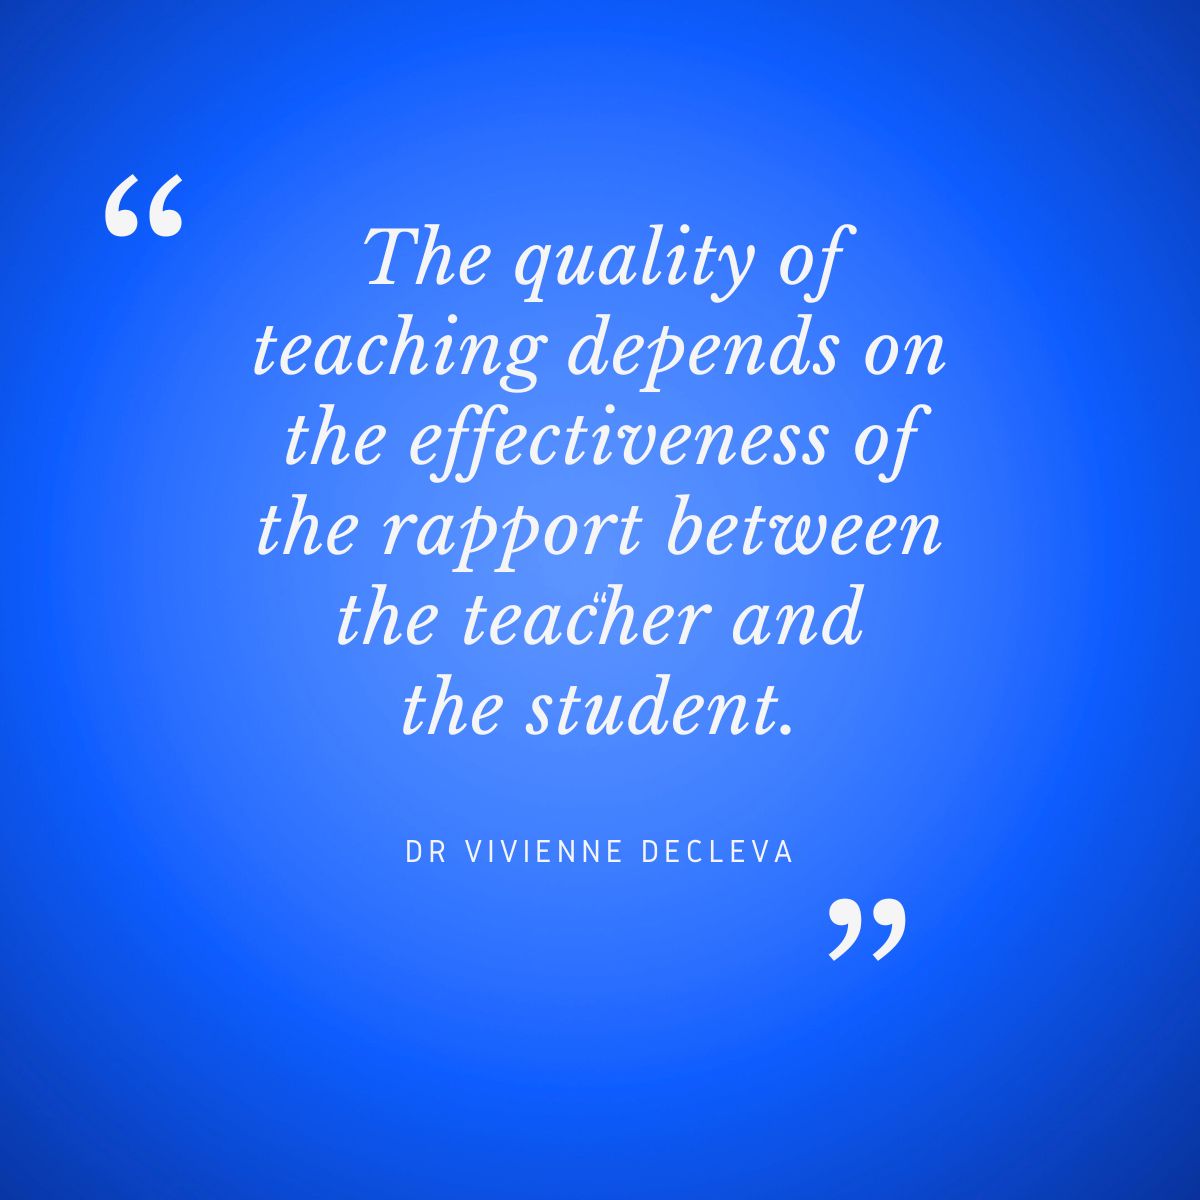 QUOTE // "The quality of teaching depends on the effectiveness of the rapport between the teacher and the student." - By Dr Vivienne Decleva #drviviennedecleva #quote #teaching